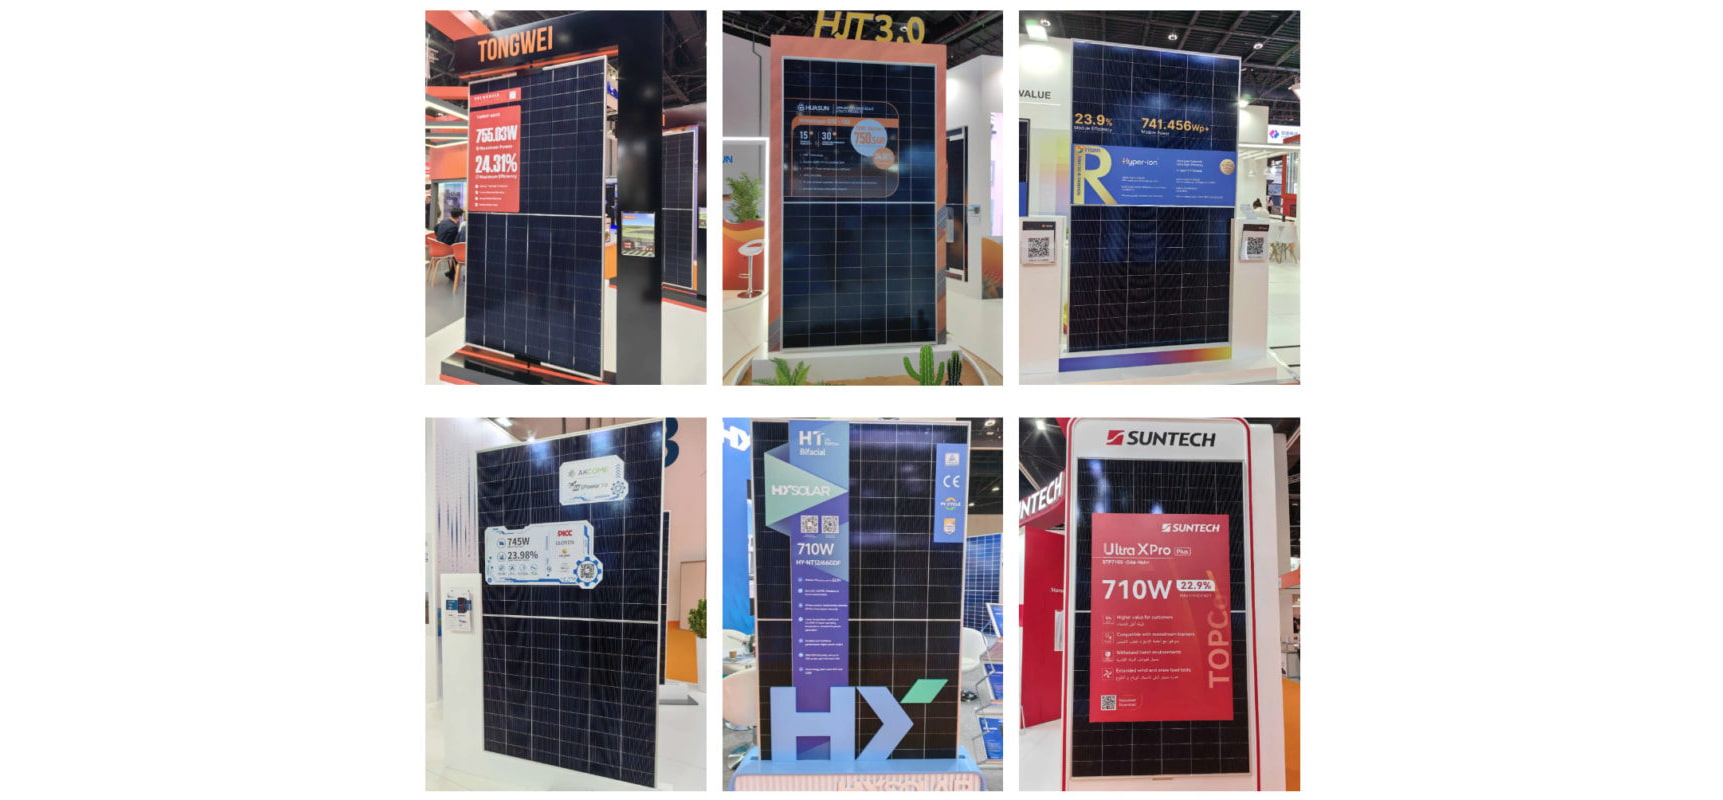 WFES 2024: HJT modules exceed 700W as larger module trend continues